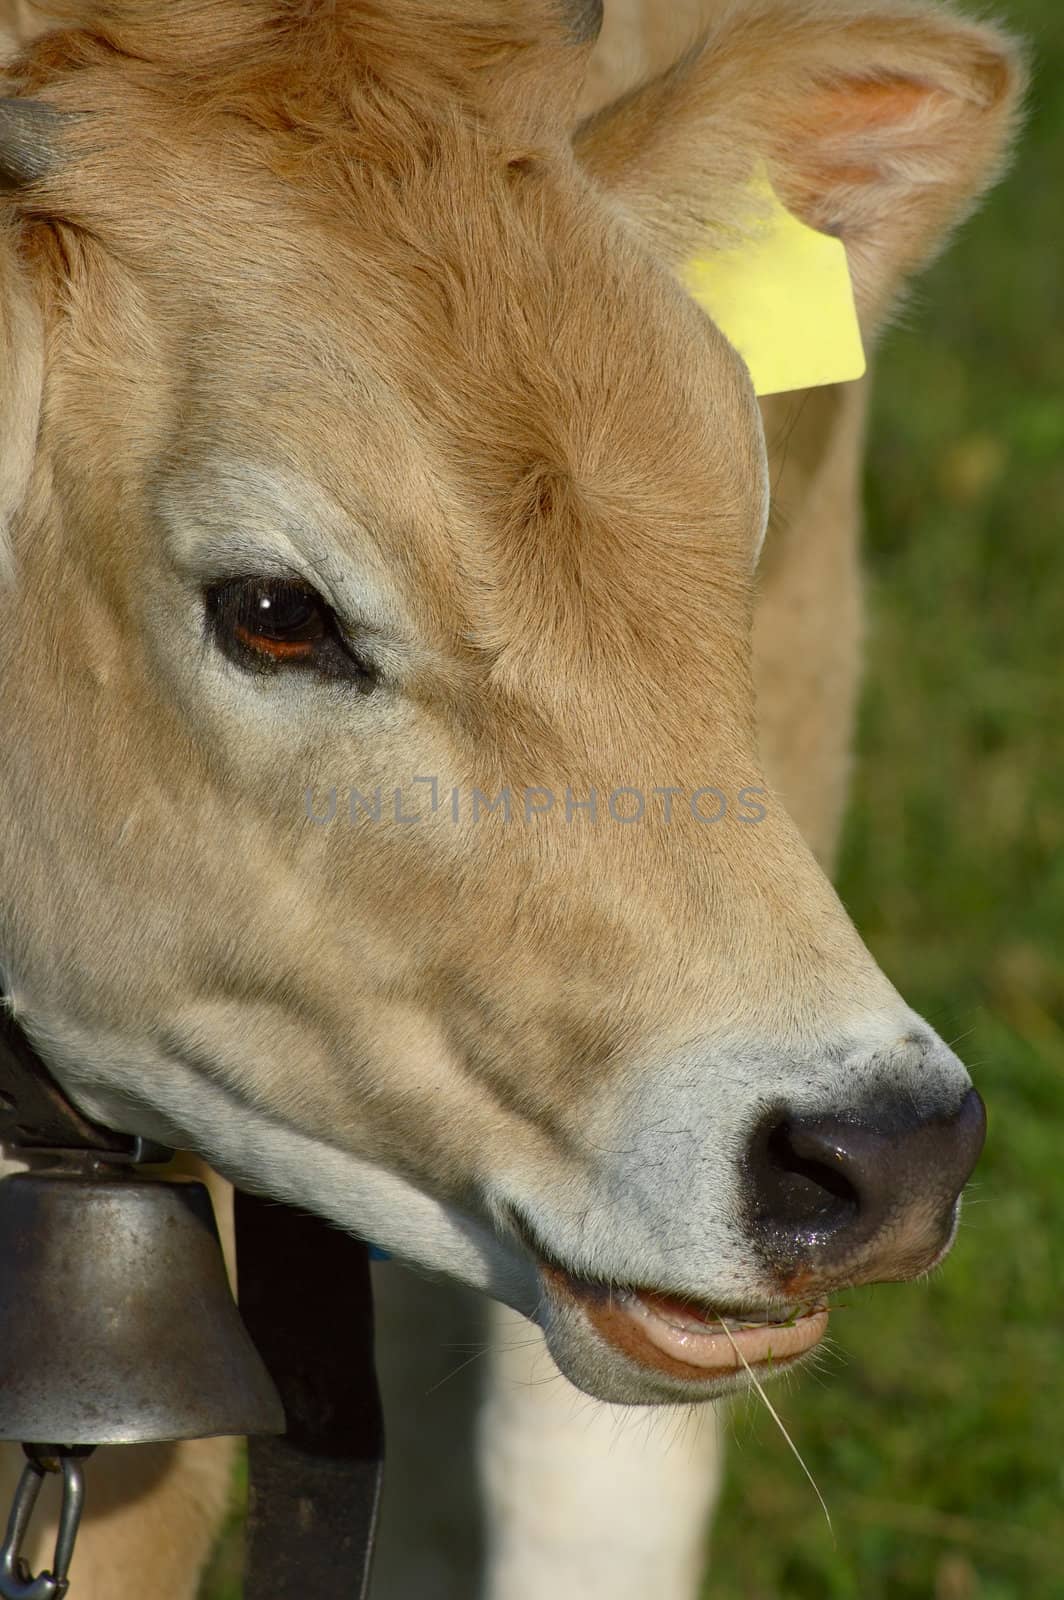 A close-up portrait of a Jersey heifer. Small amount of space for text on the yellow ear tag.
